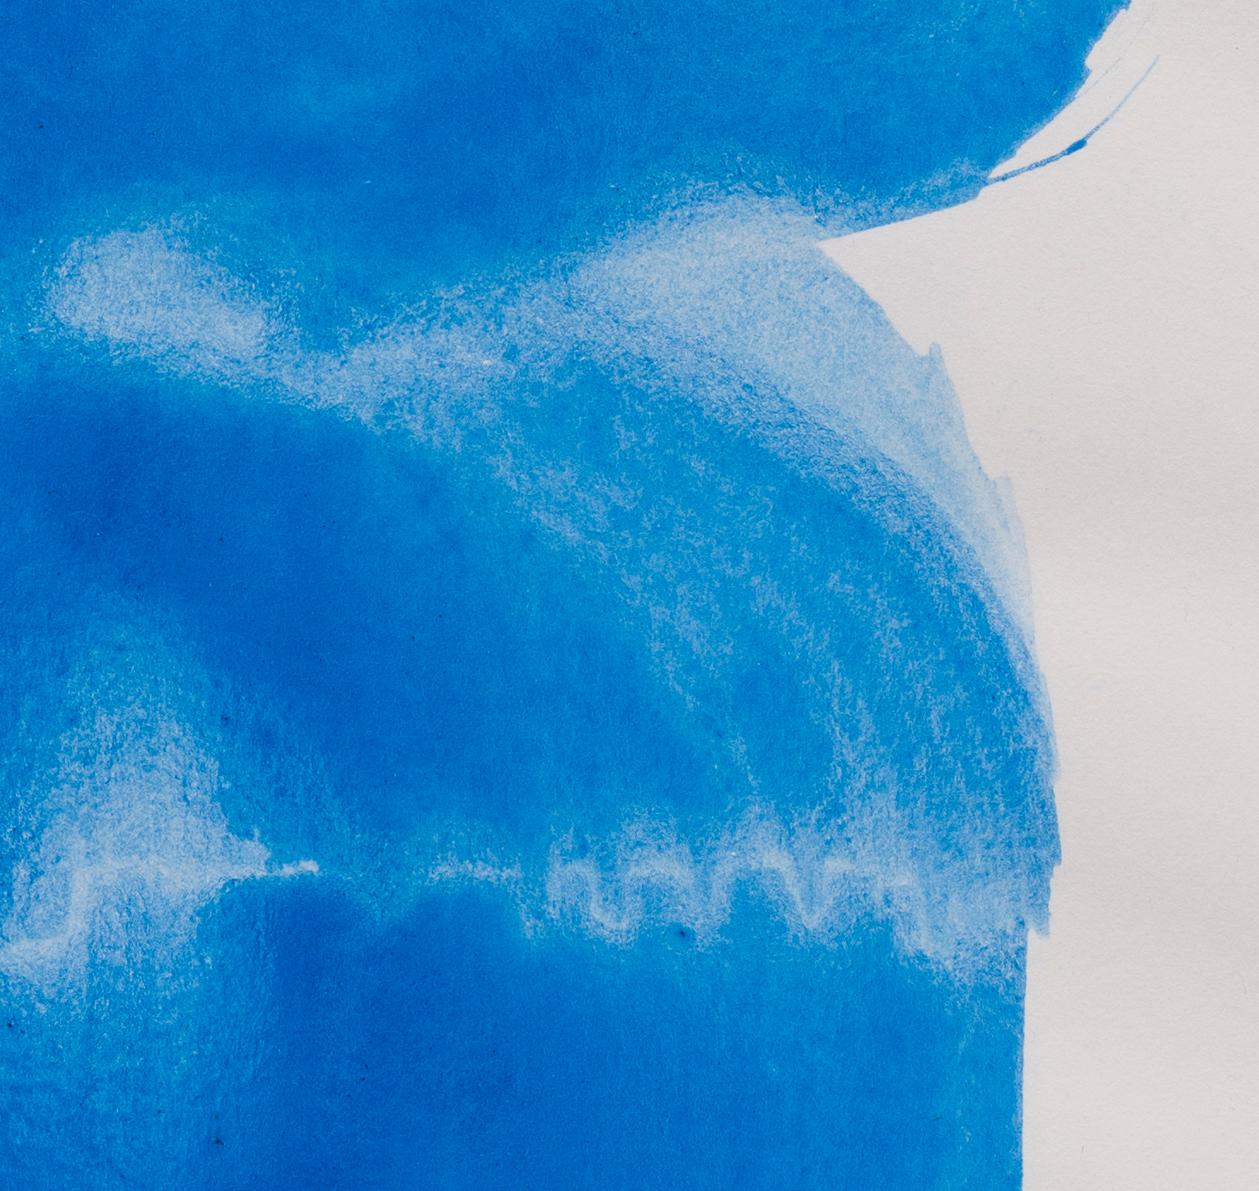 In her 1980s series of 'Wasserzeichnungen' (Water Drawings), Heidi Bucher used gestural marks in gouache on paper to create what can be described as 